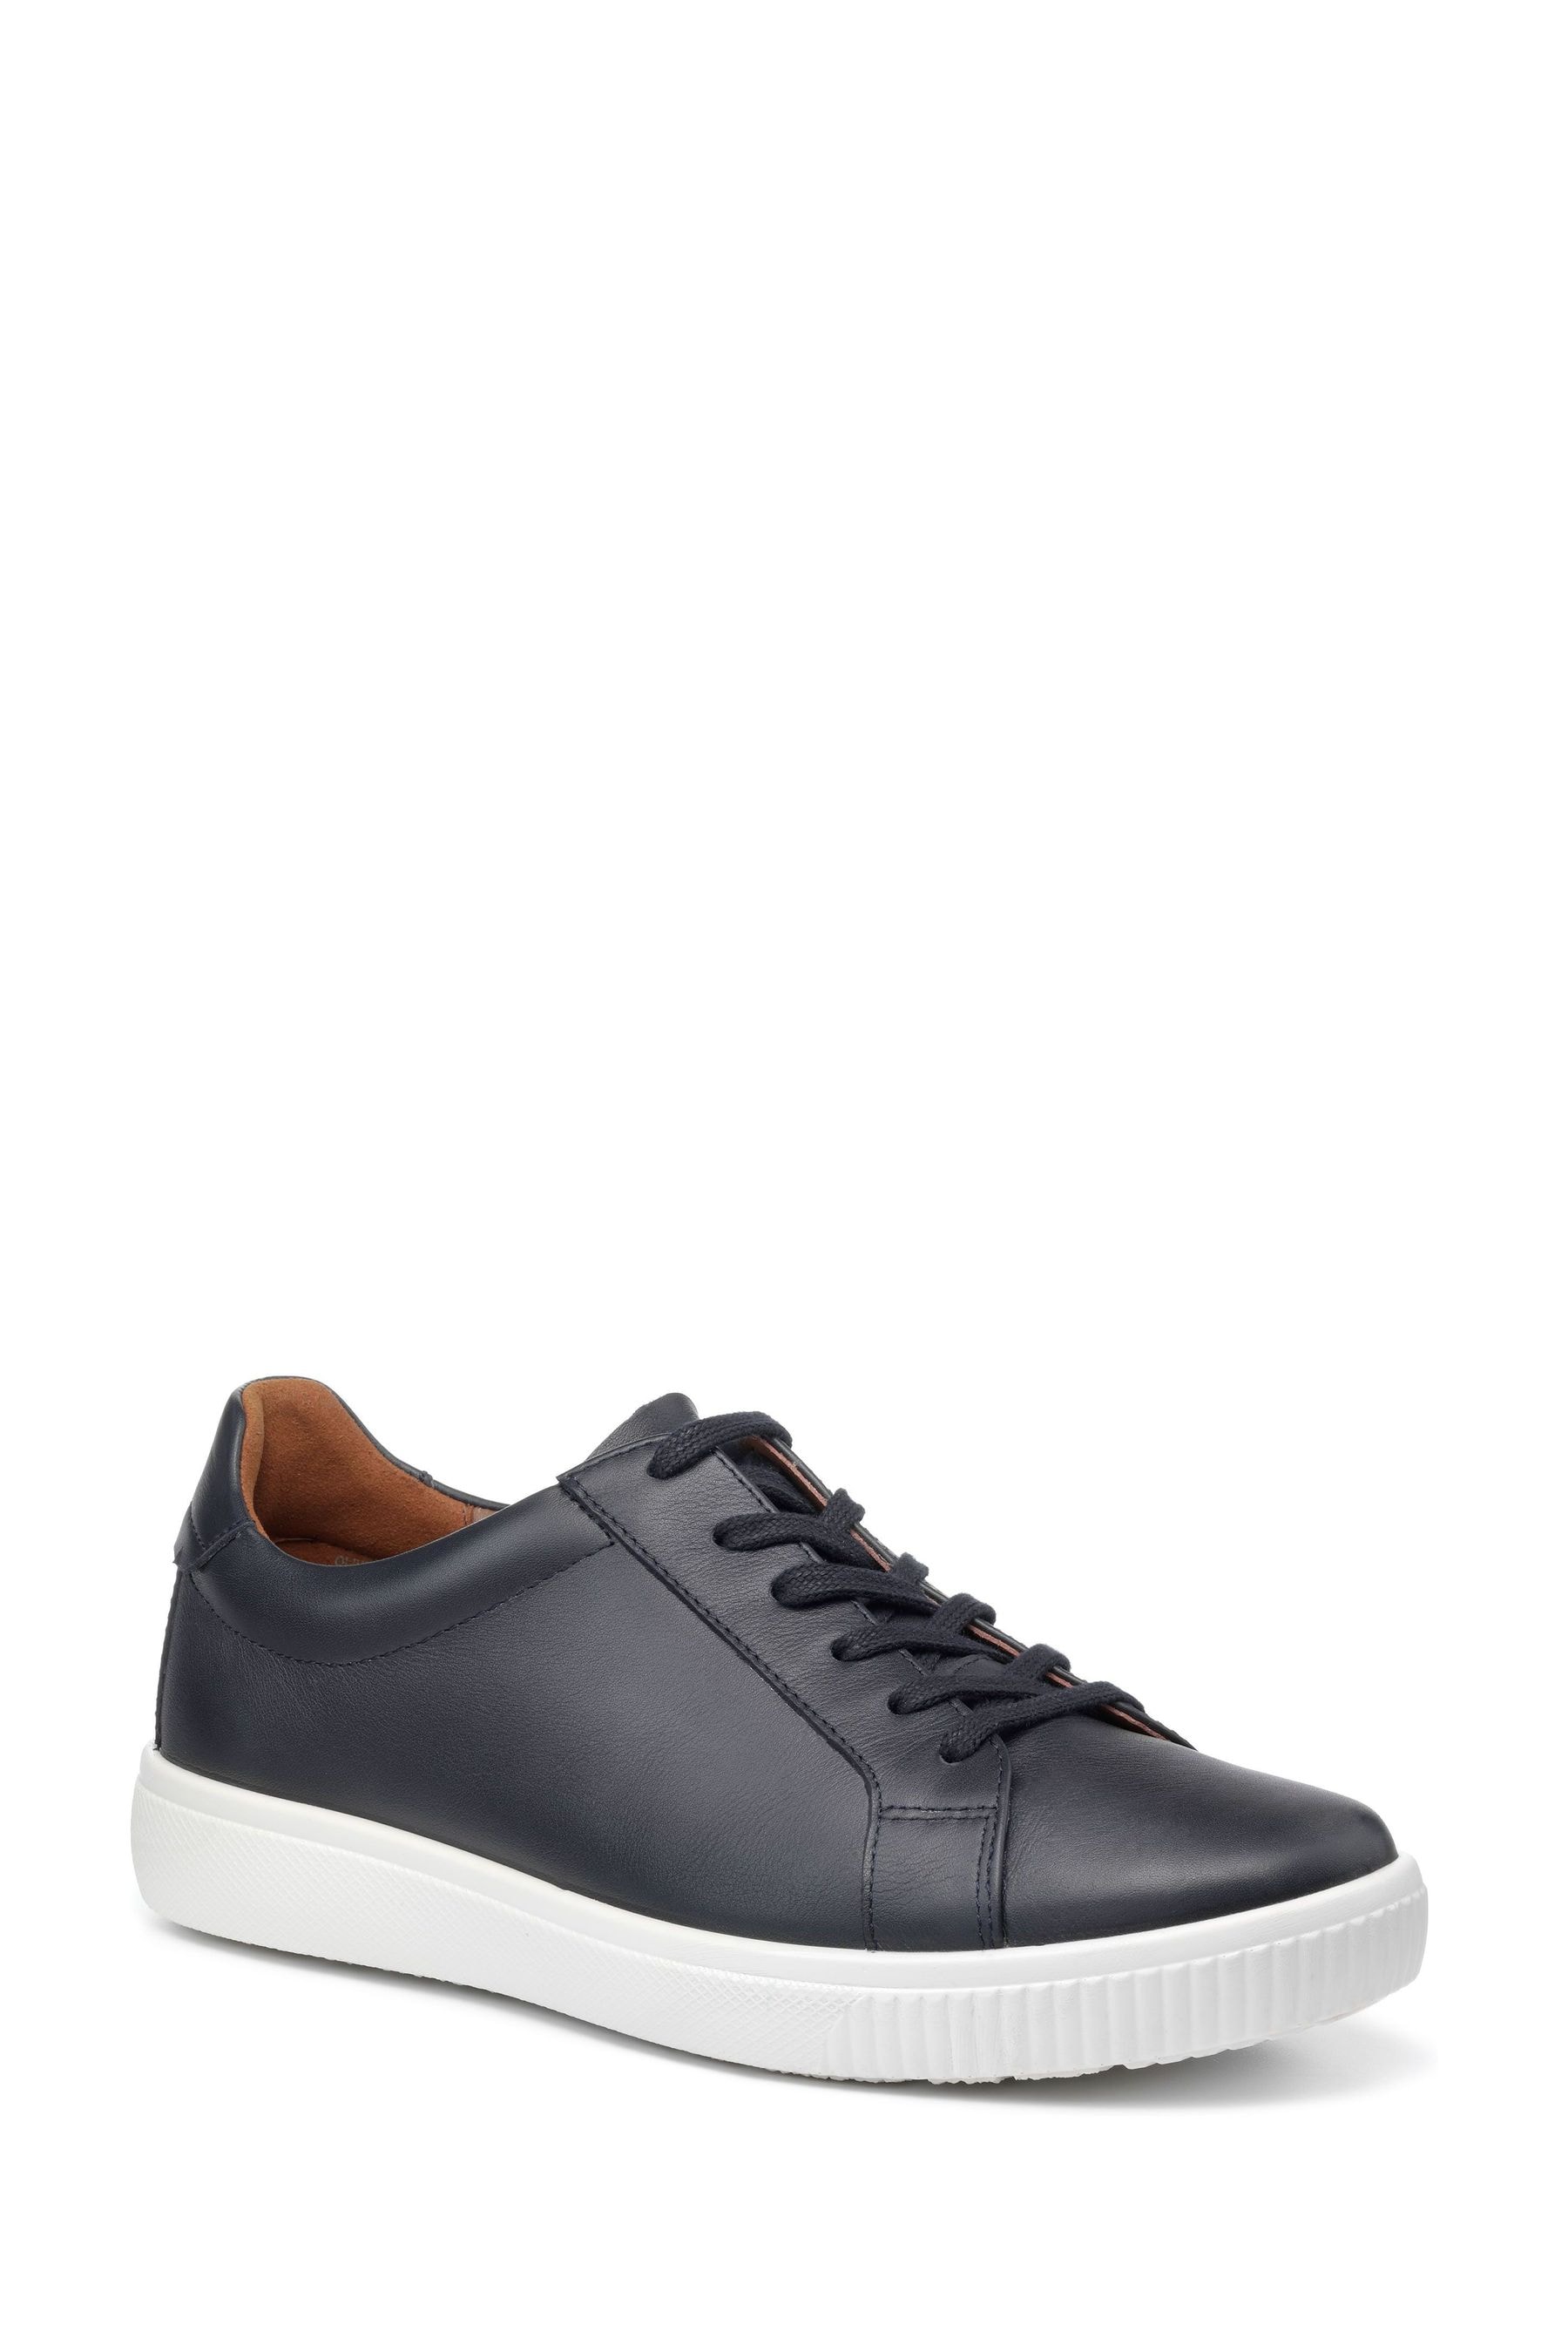 Buy Hotter Blue Oliver Lace-Up Shoes from the Next UK online shop